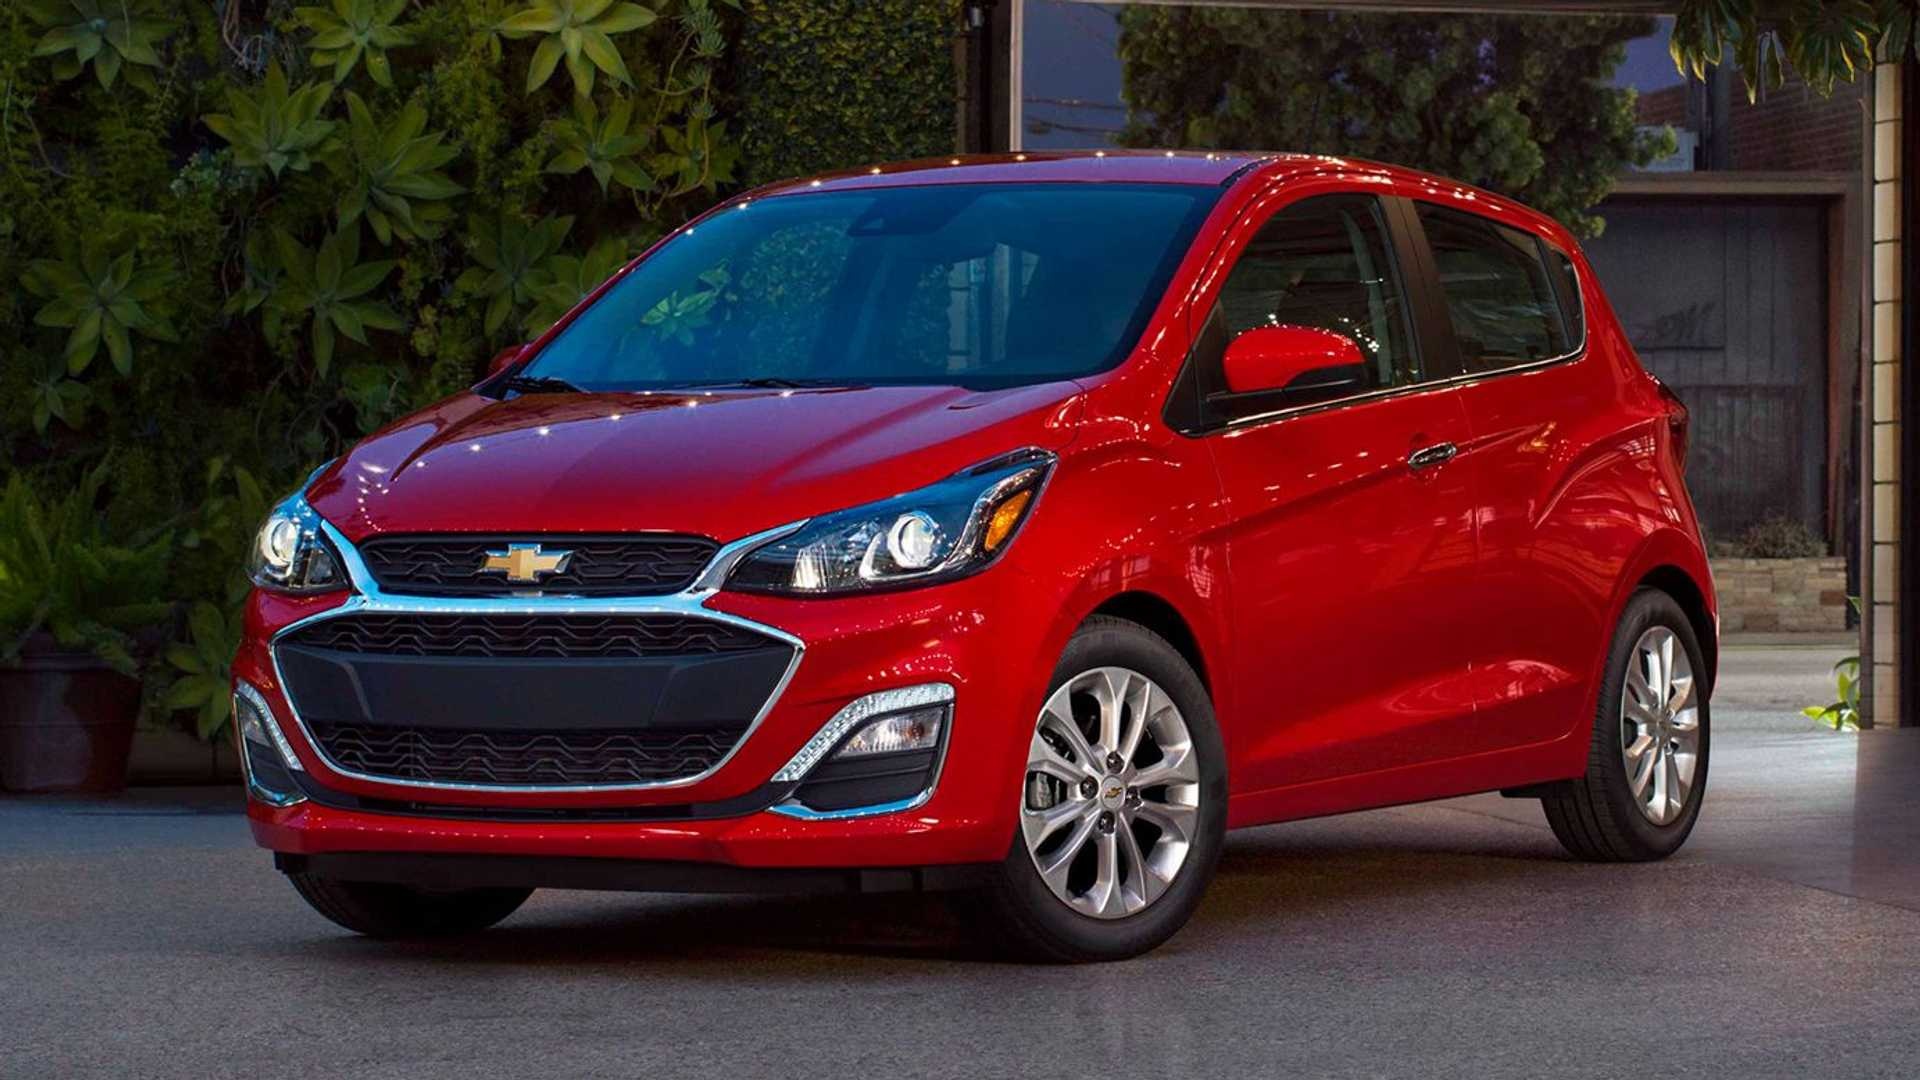 Chevrolet Spark Auto, News and reviews, Spark wallpapers, 1920x1080 Full HD Desktop